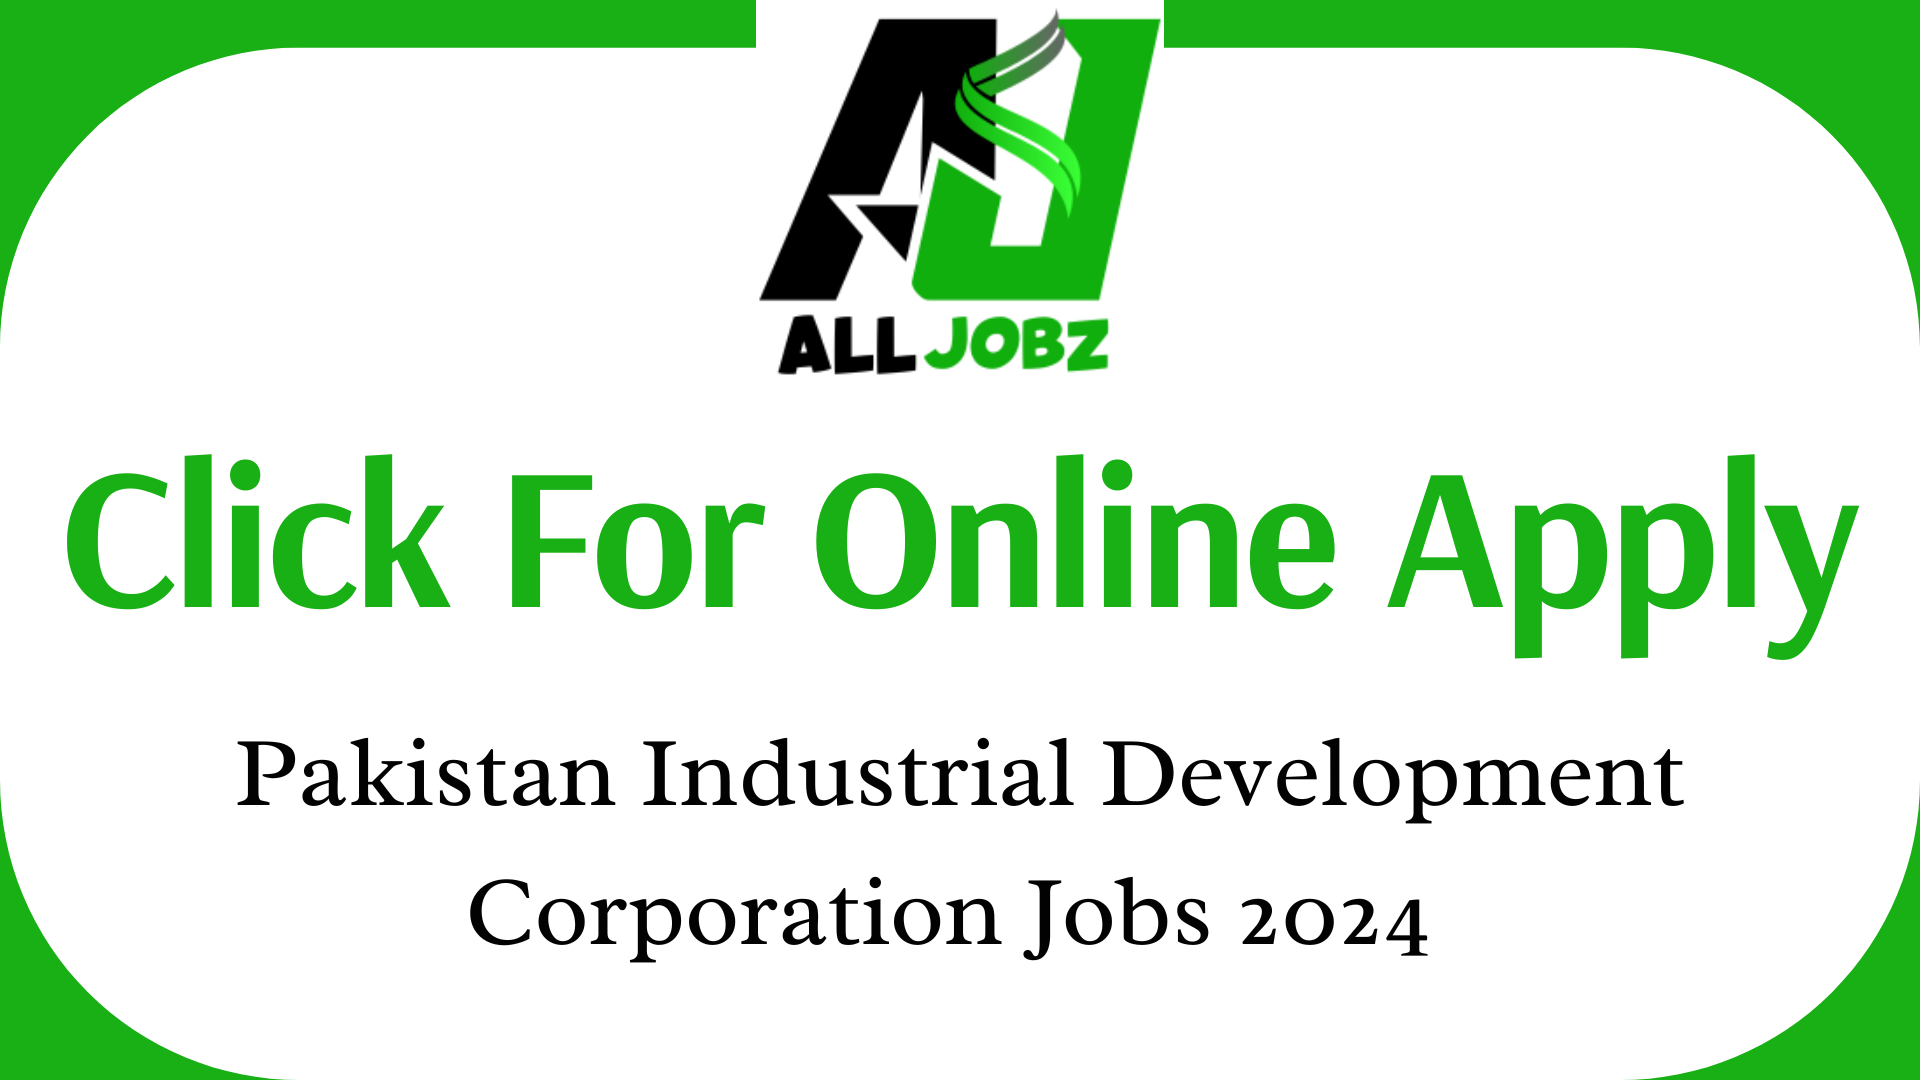 Pakistan Industrial Development Corporation Jobs 2024 Online Apply, For Assistant Manager (Accounts &Amp; Finance), Officer (Accounts &Amp; Finance), Assistant Manager (Internal Audit), Assistant Manager (Electrical), Management Trainee Officer (Accounting And Finance), Management Trainee Officer (Electrical &Amp; Civil), Pakistan Industrial Development Corporation Jobs 2024 Online Apply For Female, Pakistan Industrial Development Corporation Jobs 2024 Online Apply Date, Pakistan Industrial Development Corporation Jobs 2024 Online Apply Karachi, Pakistan Industrial Development Corporation Was Established In, Pid